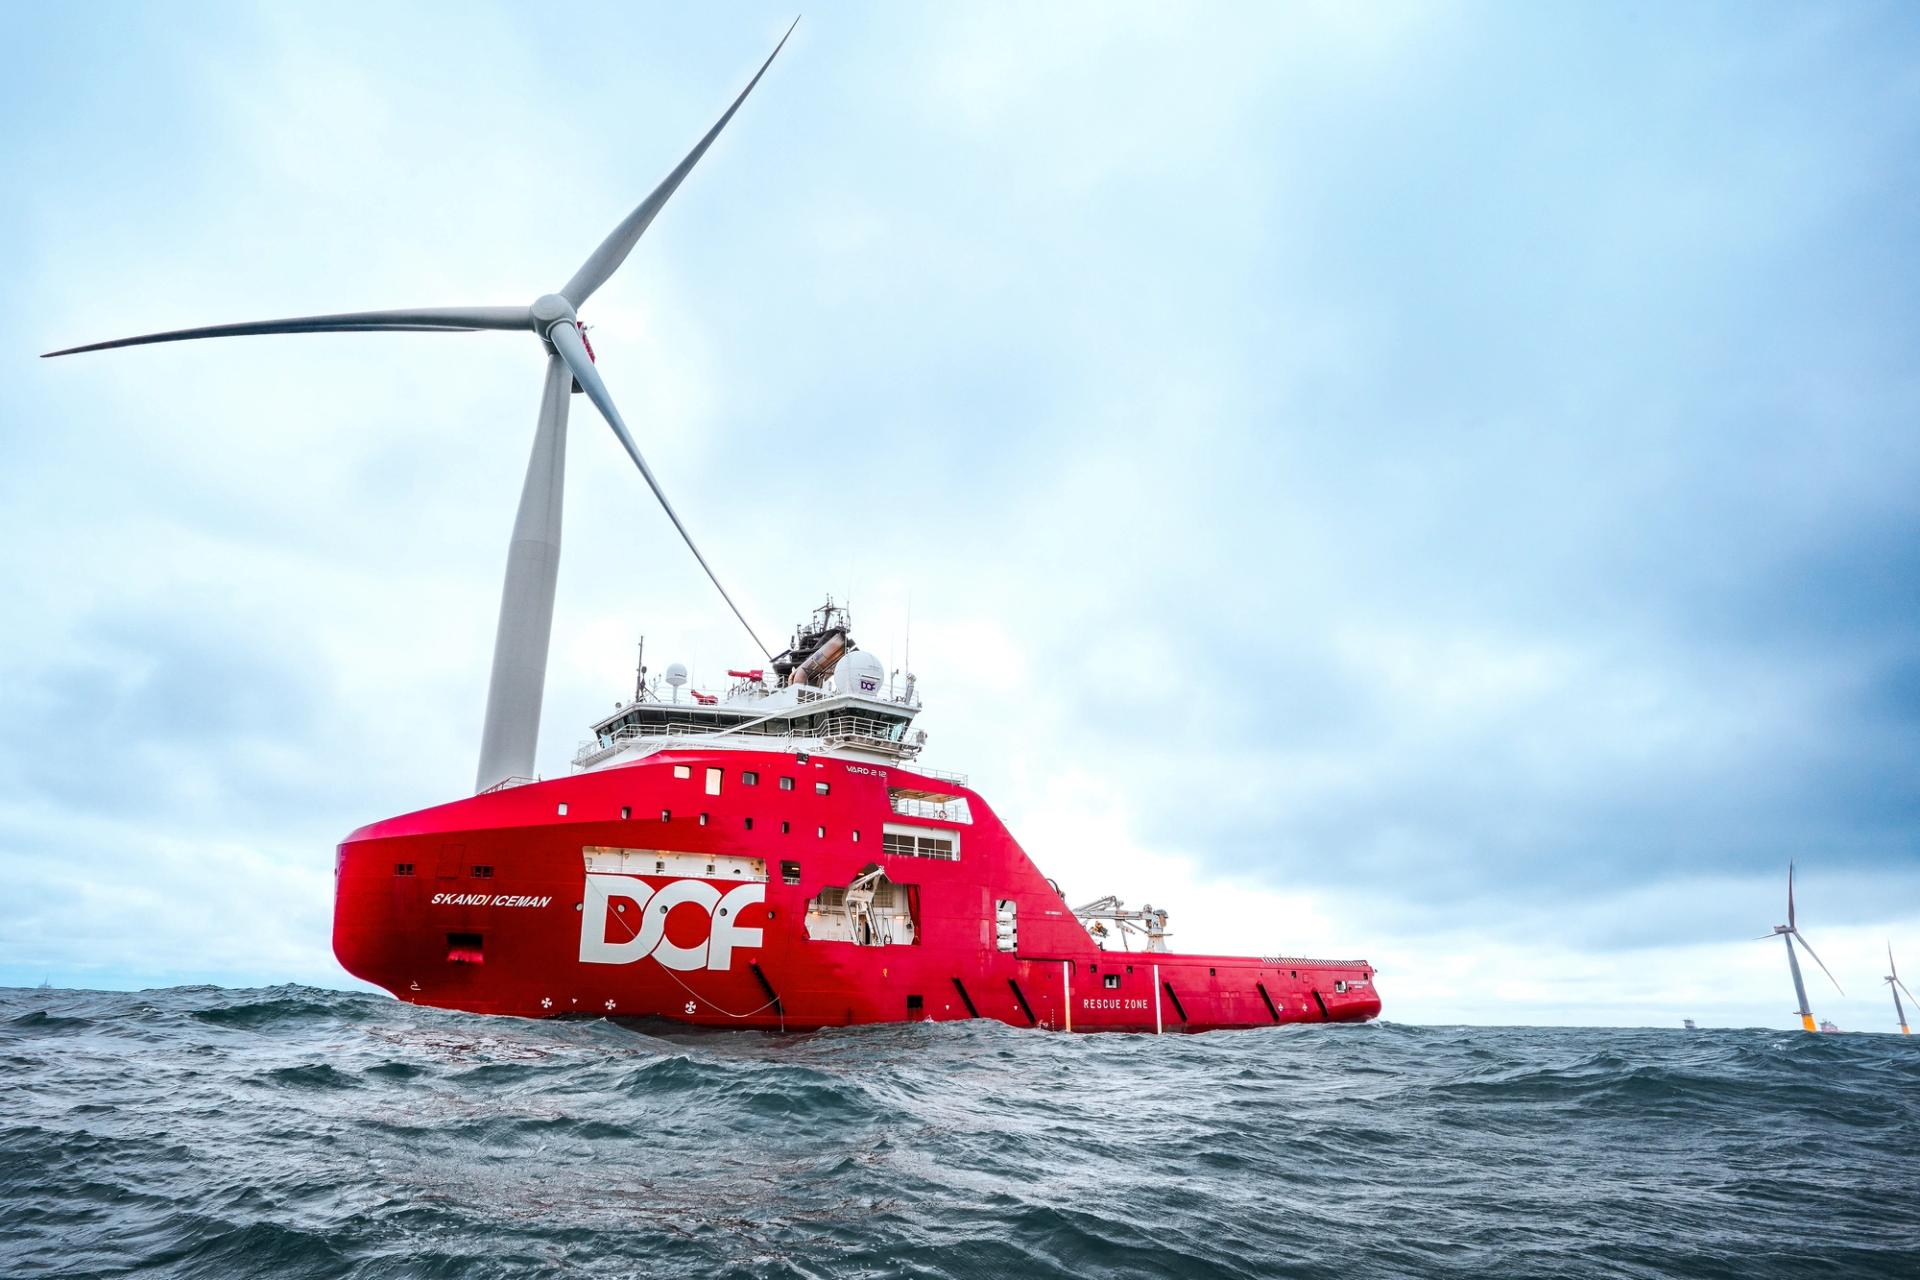 Red boat in front of a white offshore wind turbine